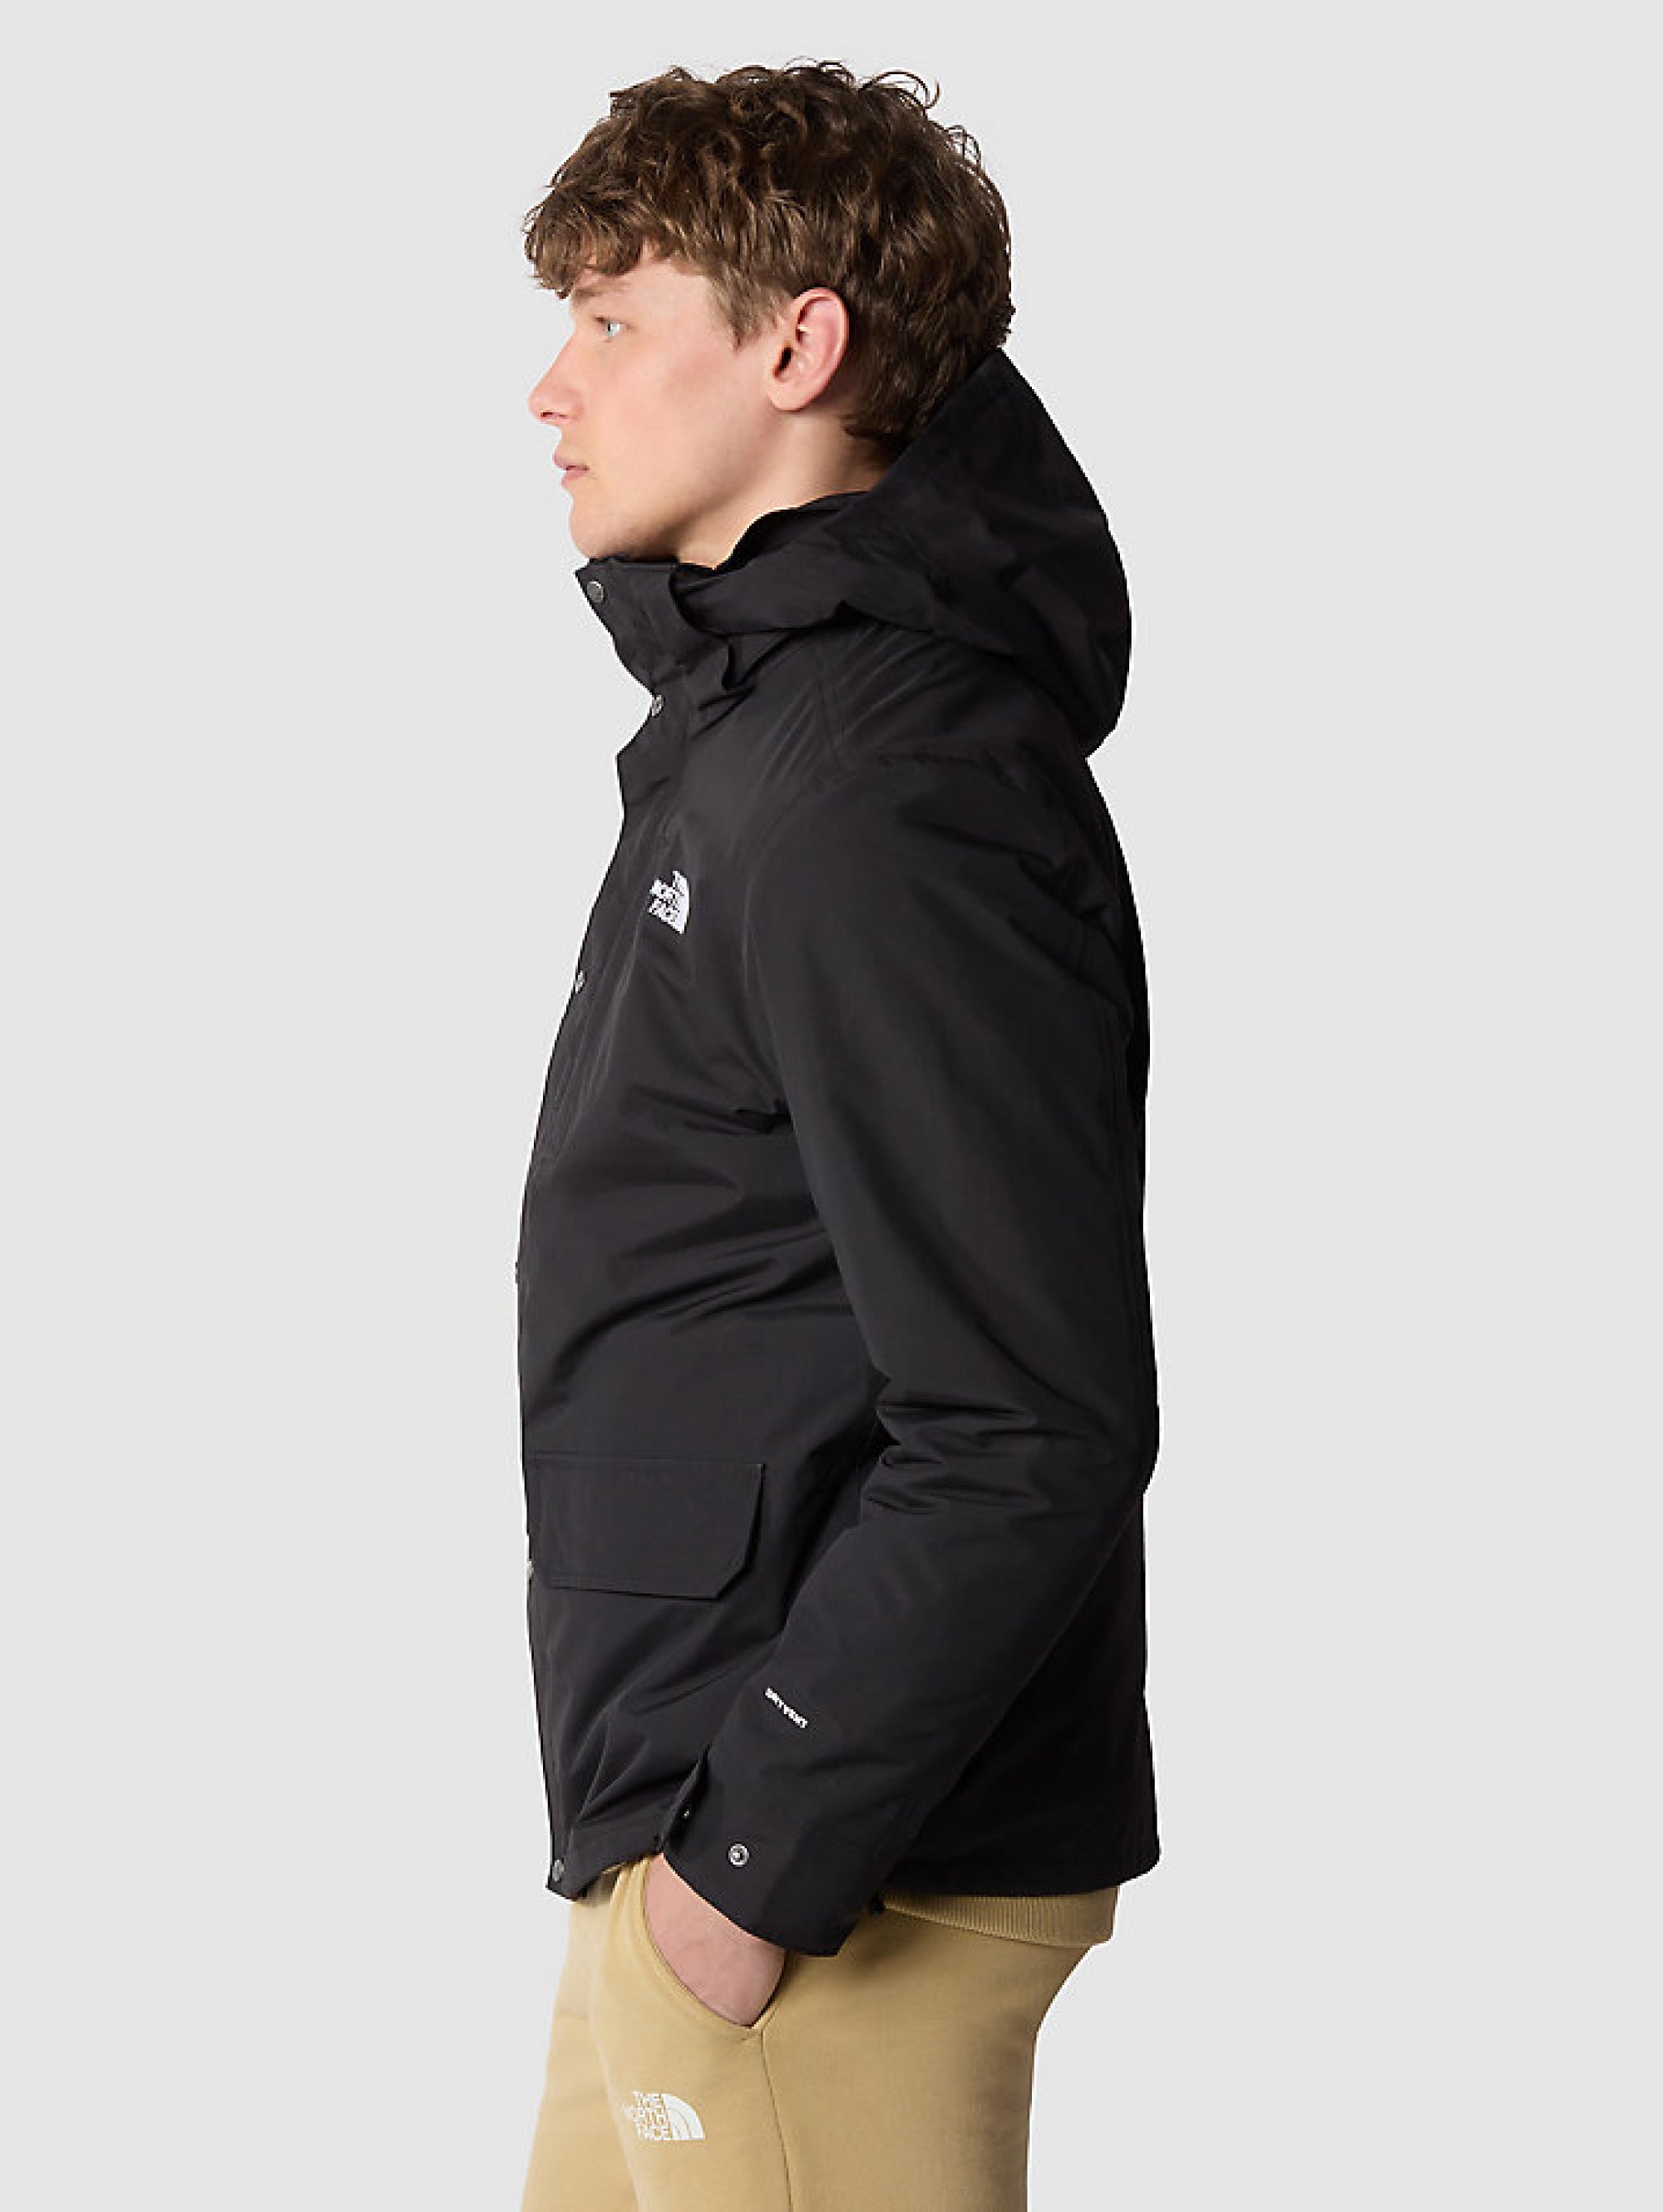 Pinecroft Triclimate Multi Layer Jacket Black